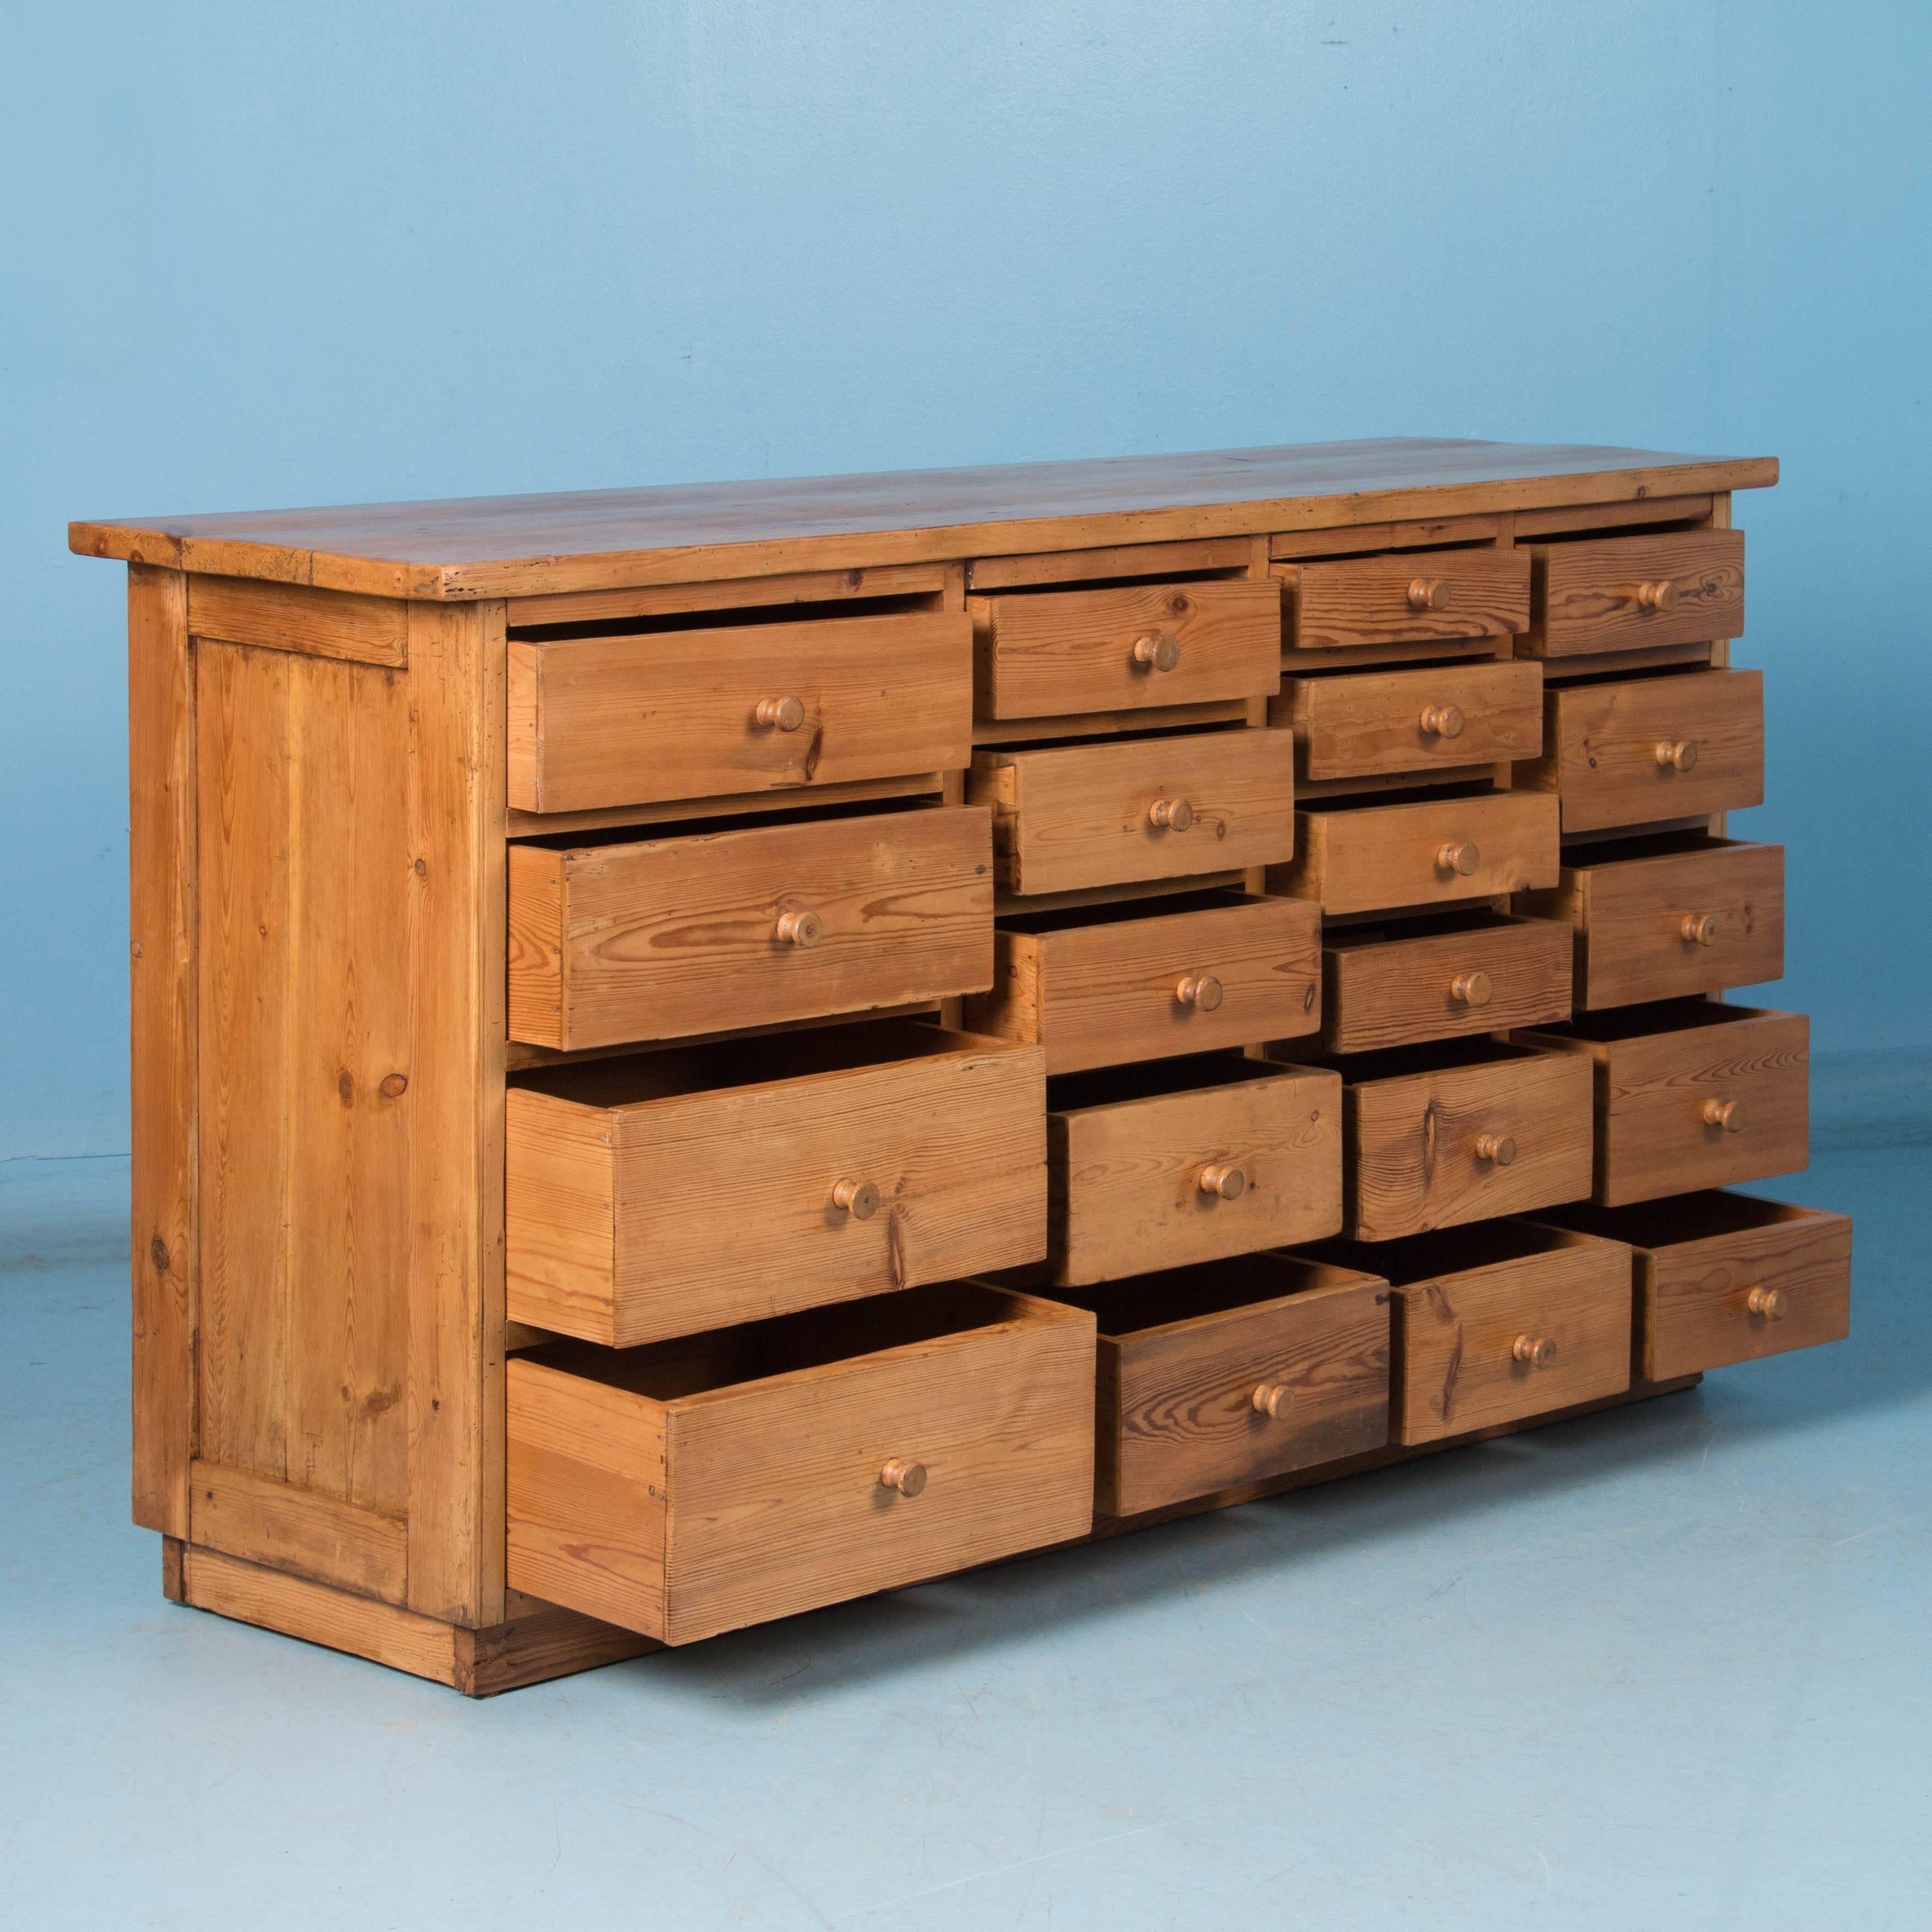 This unique Danish pine sideboard has a country mercantile look with a total of 20 drawers divided into in four columns, each column having a different size drawer which creates great visual appeal along with unique storage options. It is panelled